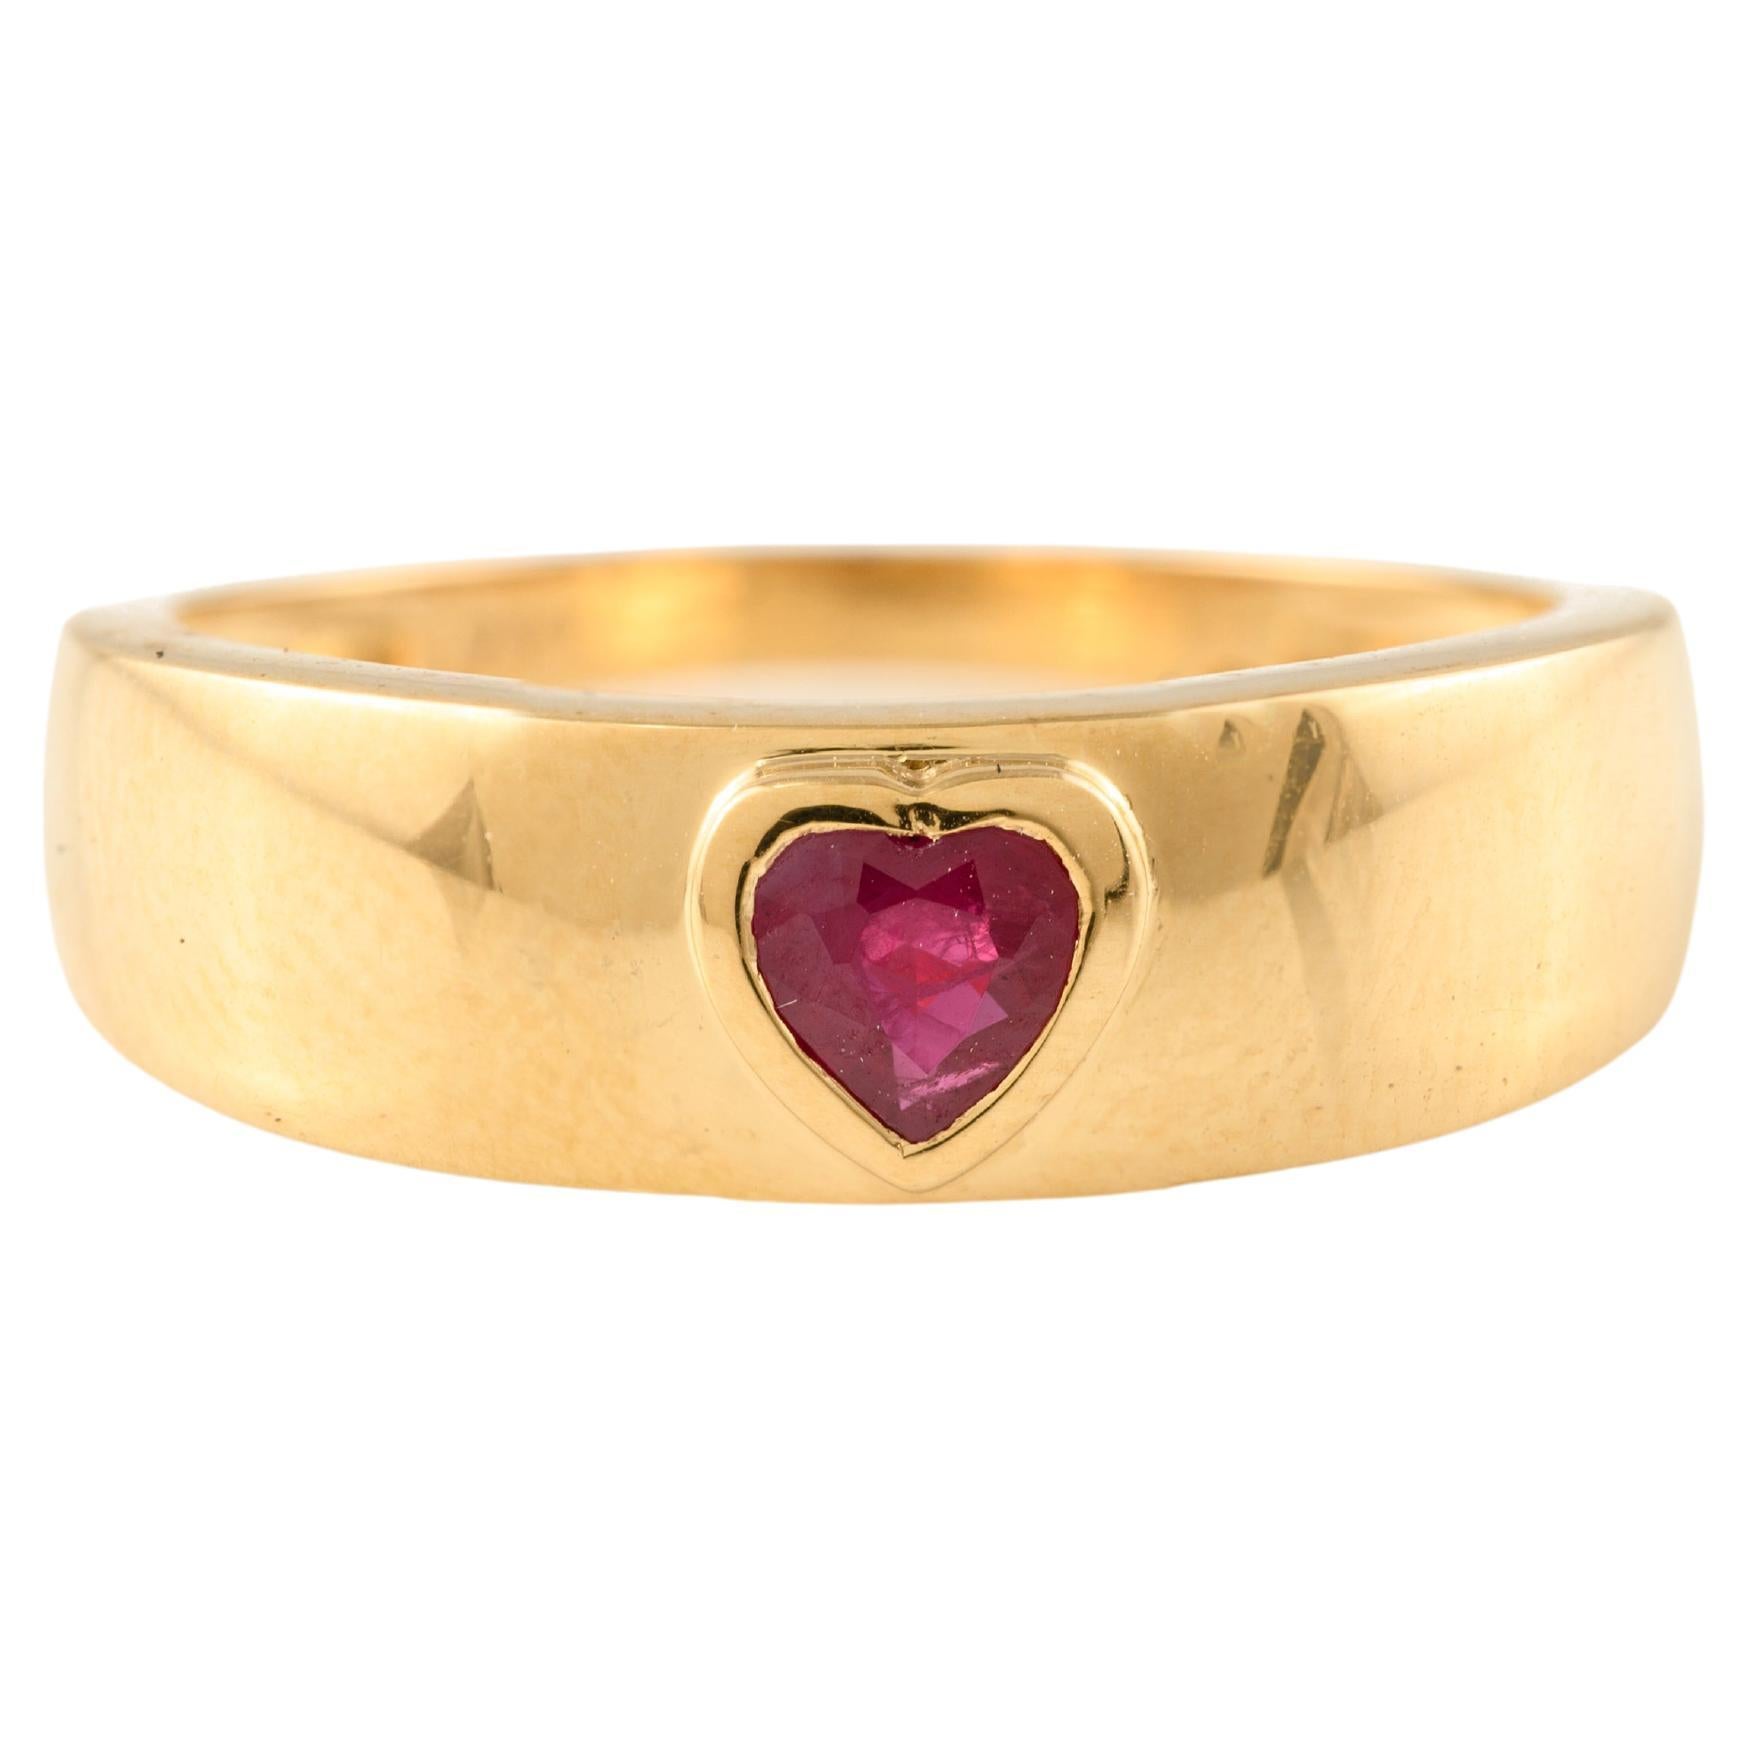 Dainty Heart Cut Ruby Mens Ring in 18k Solid Yellow Gold, Signet Ring for Her